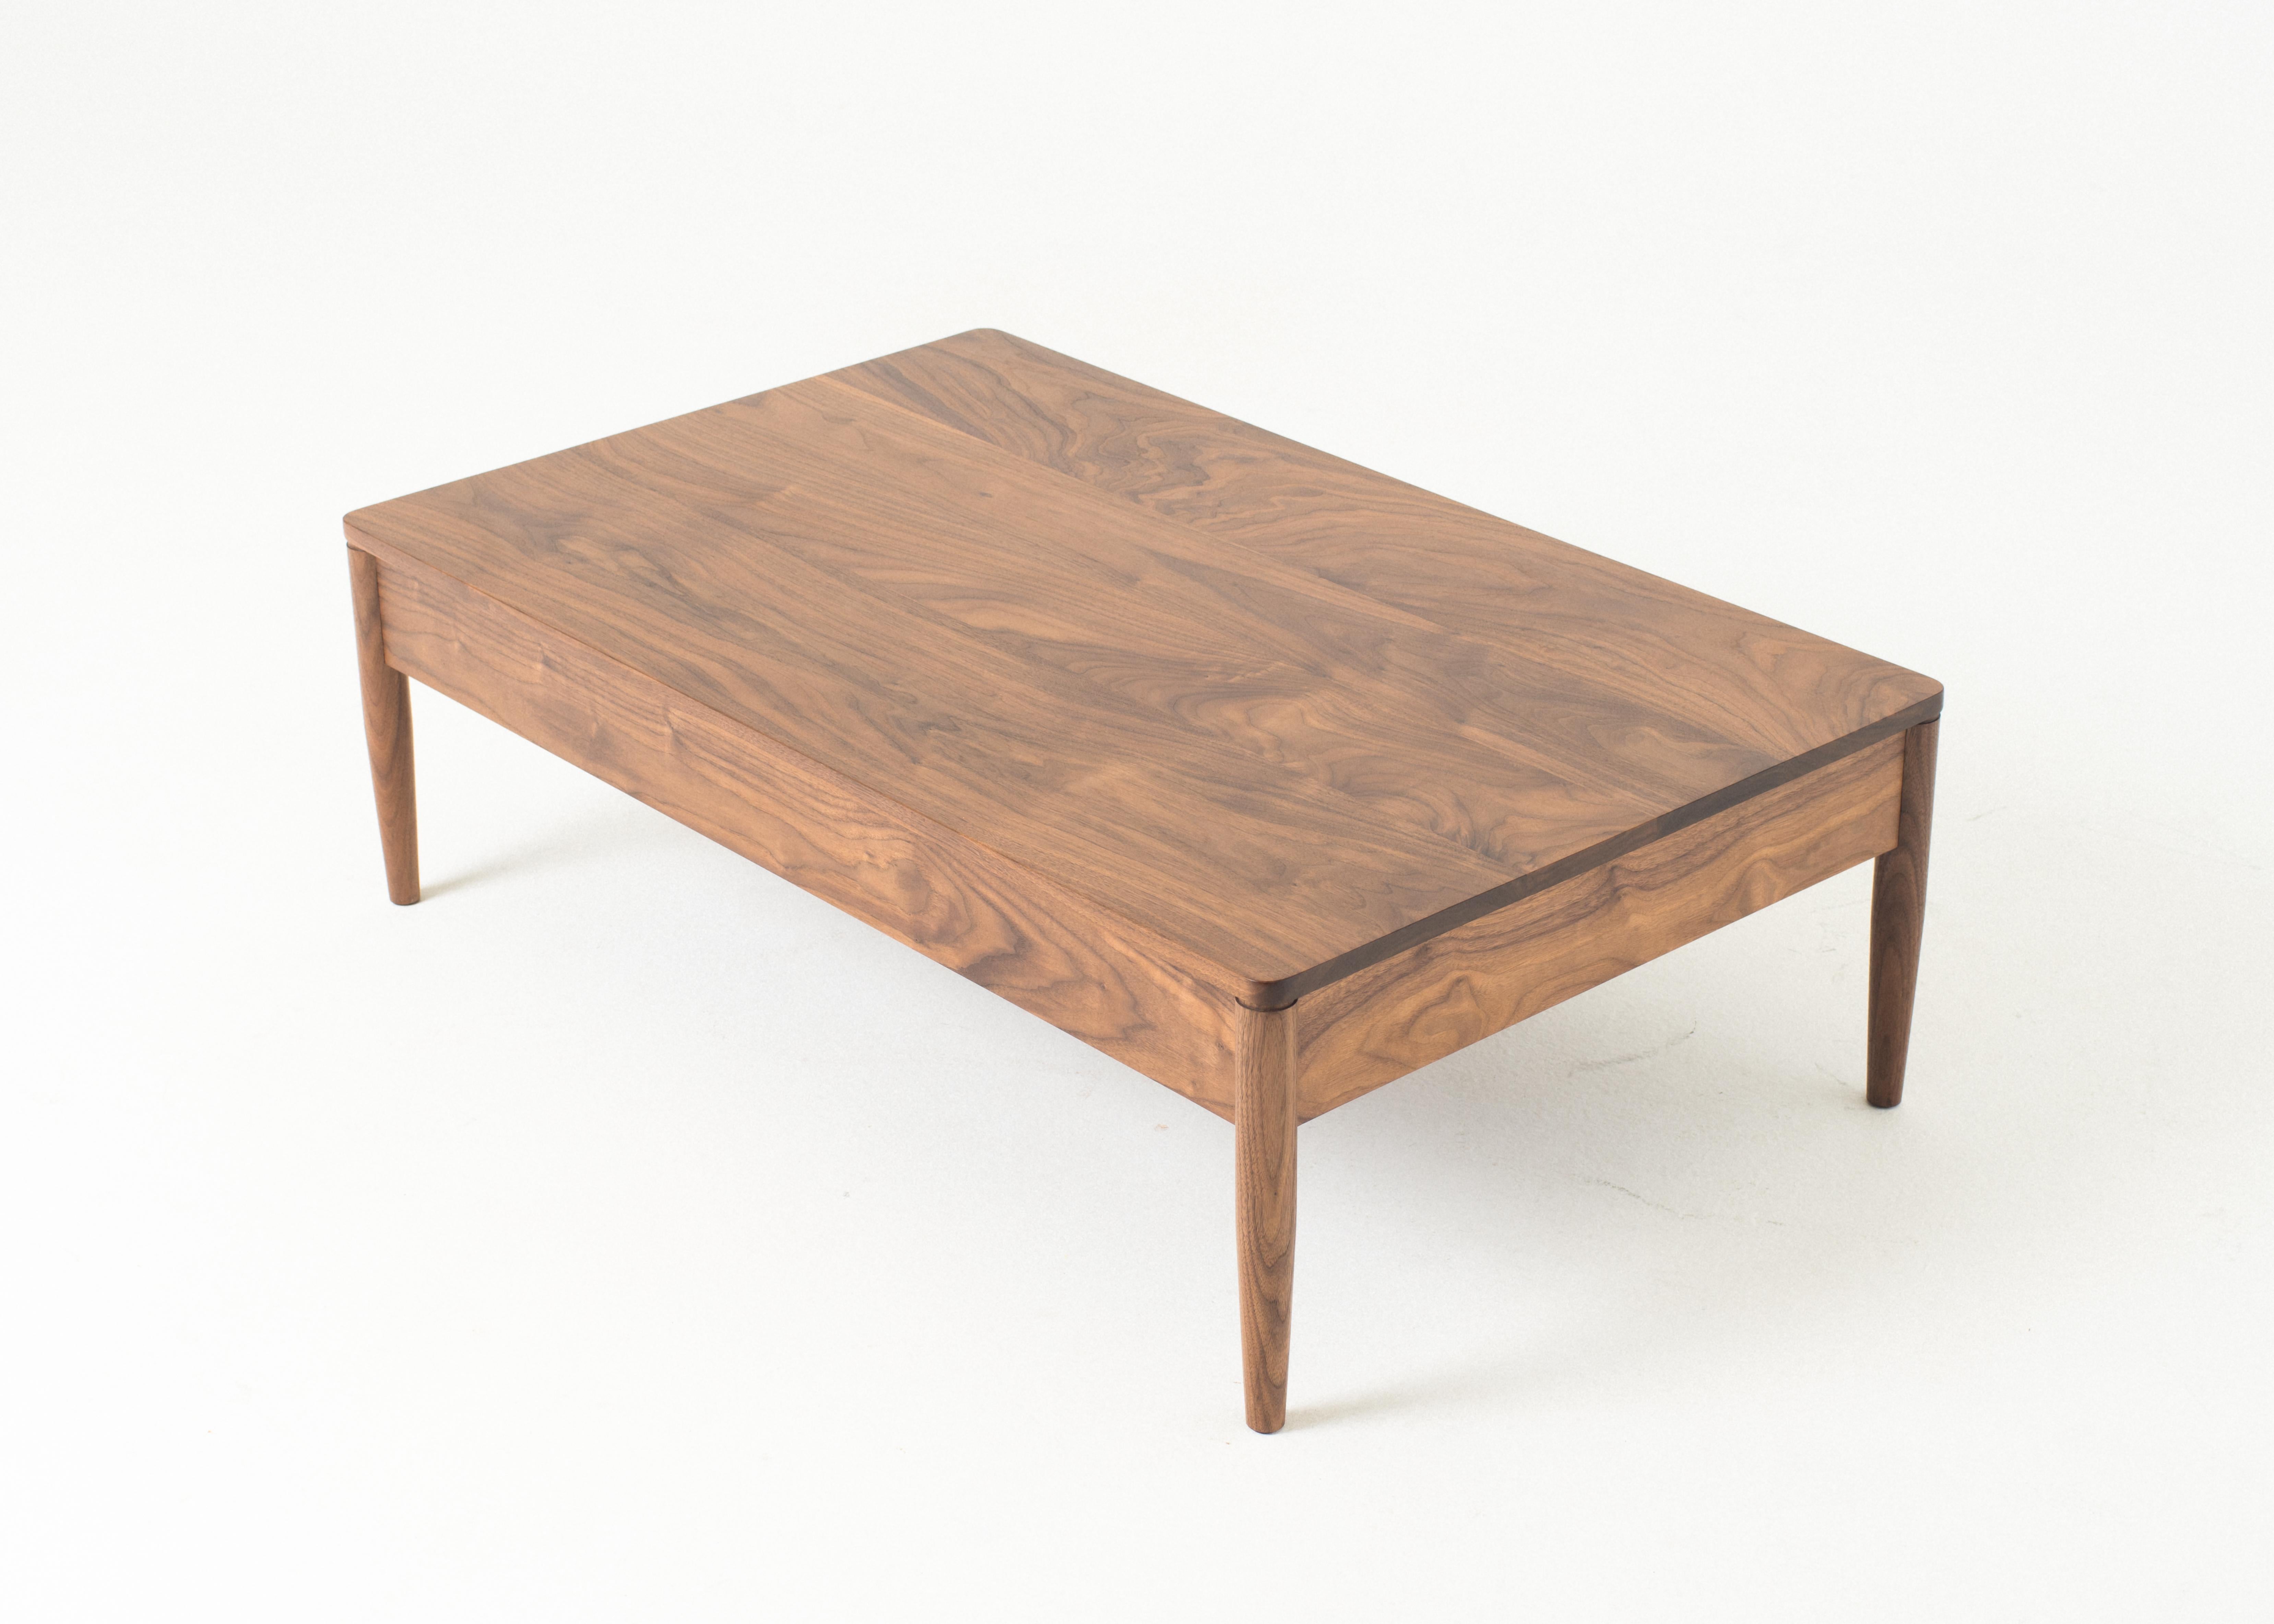 Contemporary Calvin Low Table Medium, Handcrafted Solid Wood Coffee Table For Sale